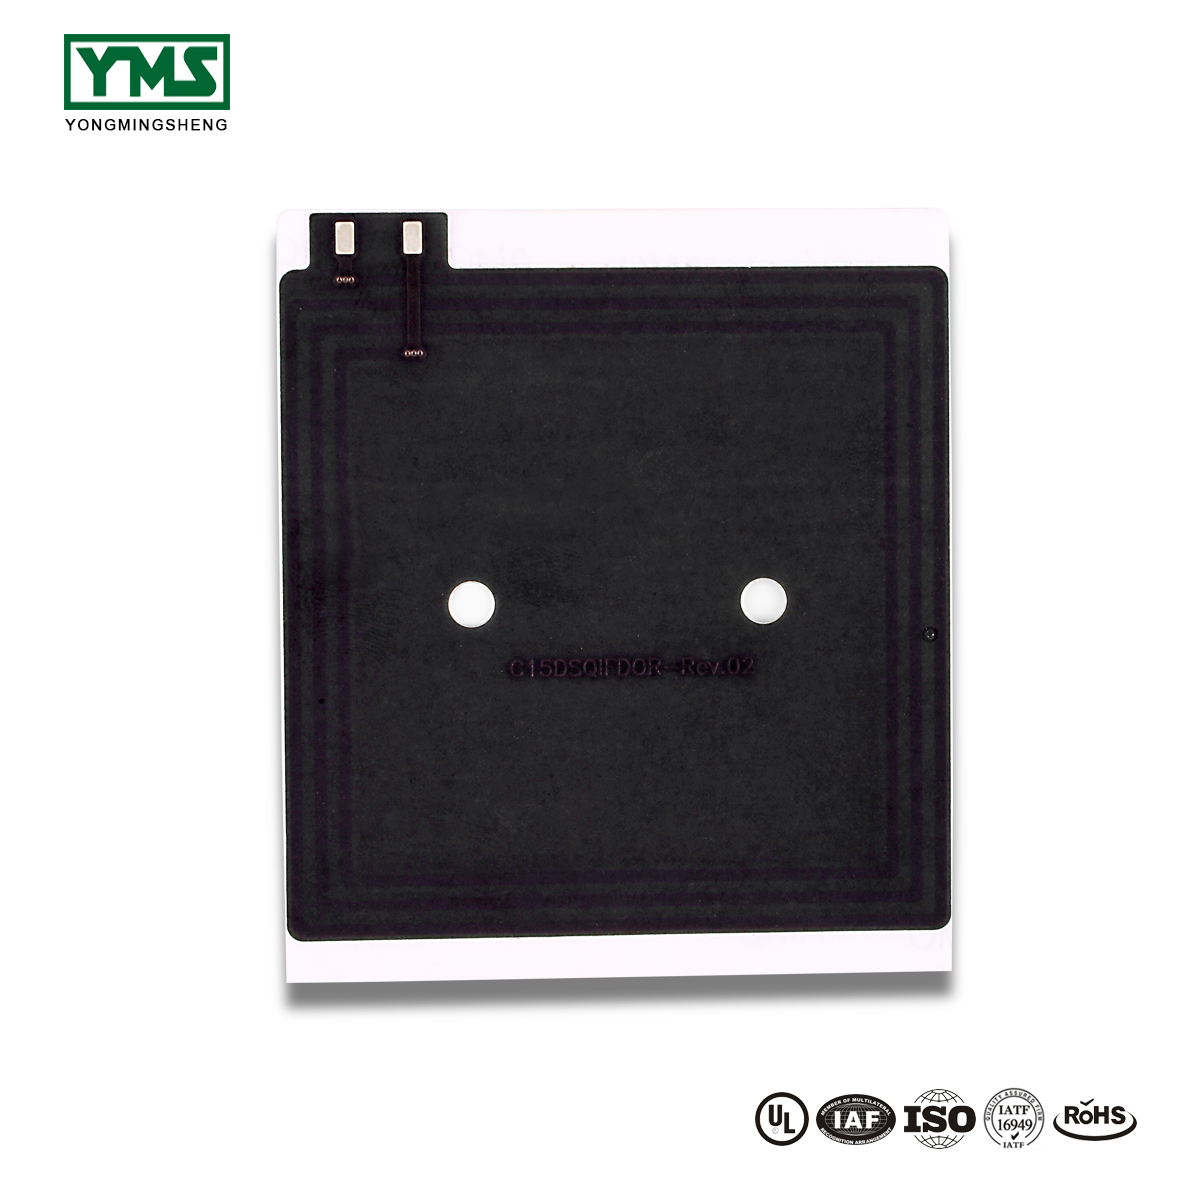 Super Purchasing for 3mil Printed Circuit Boards - 1Layer Black solder mask Flexible Board | YMSPCB – Yongmingsheng